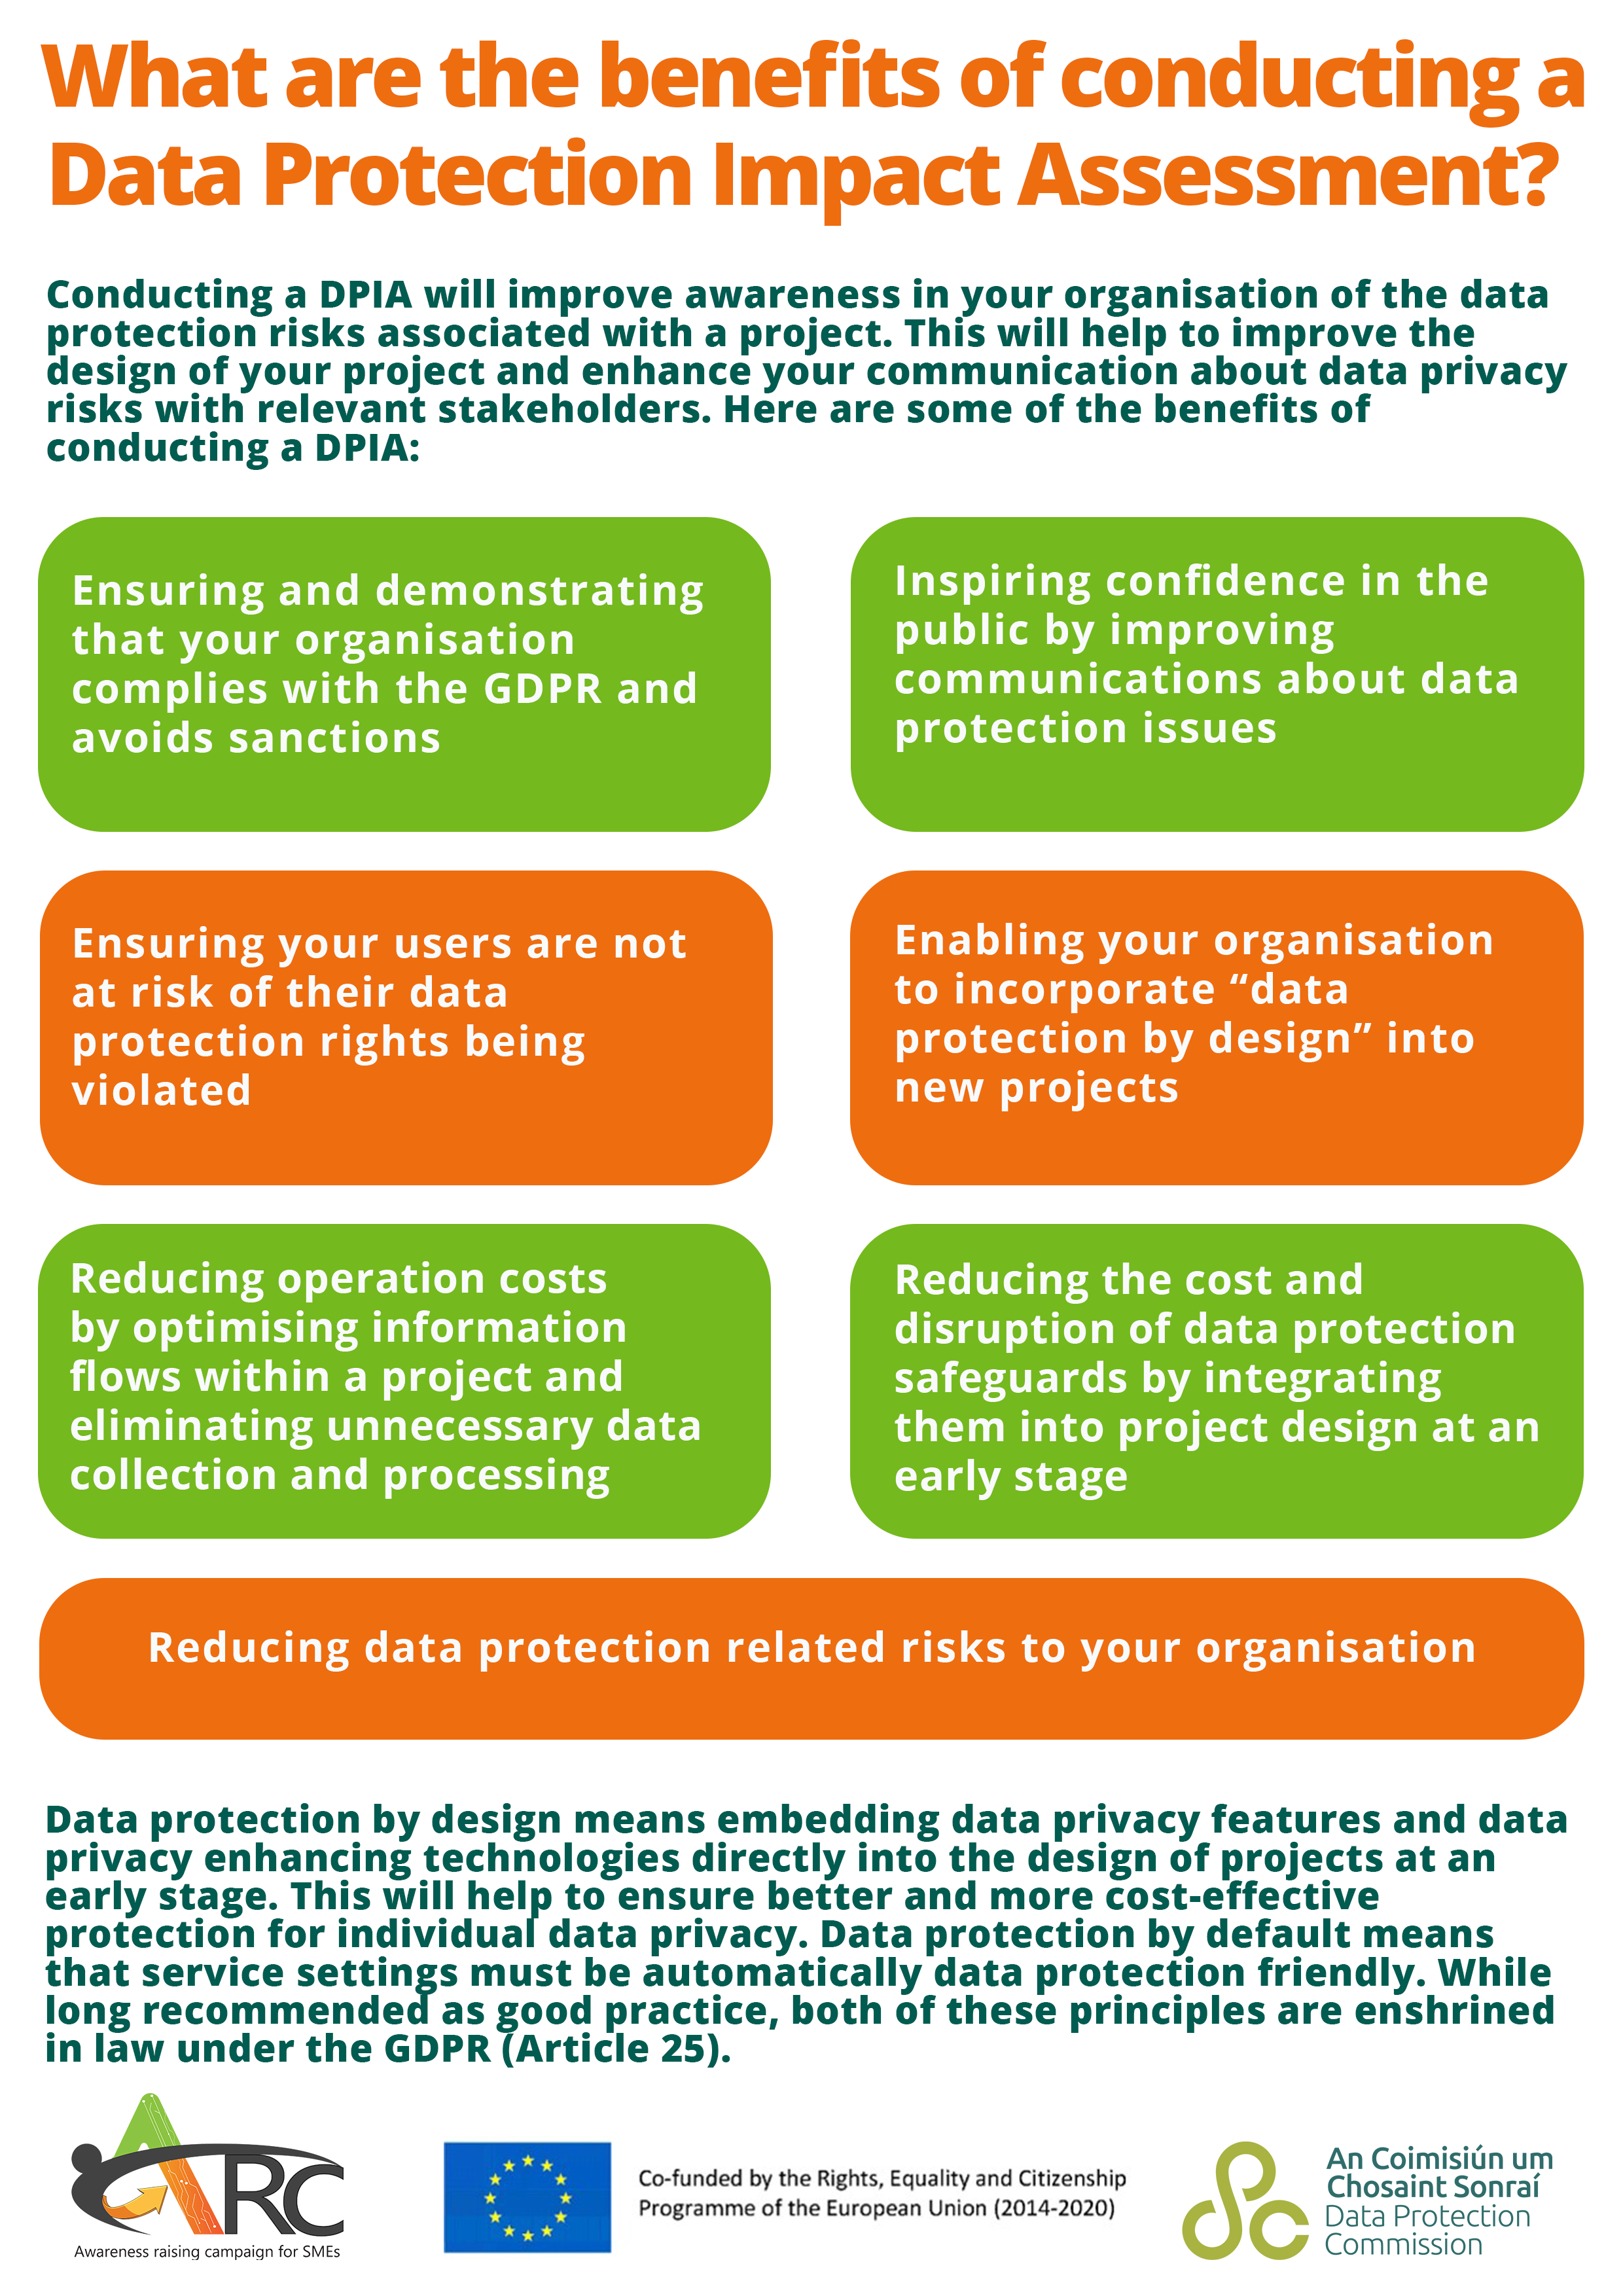 What are the benefits of conducting a Data Protection Impact Assessment?